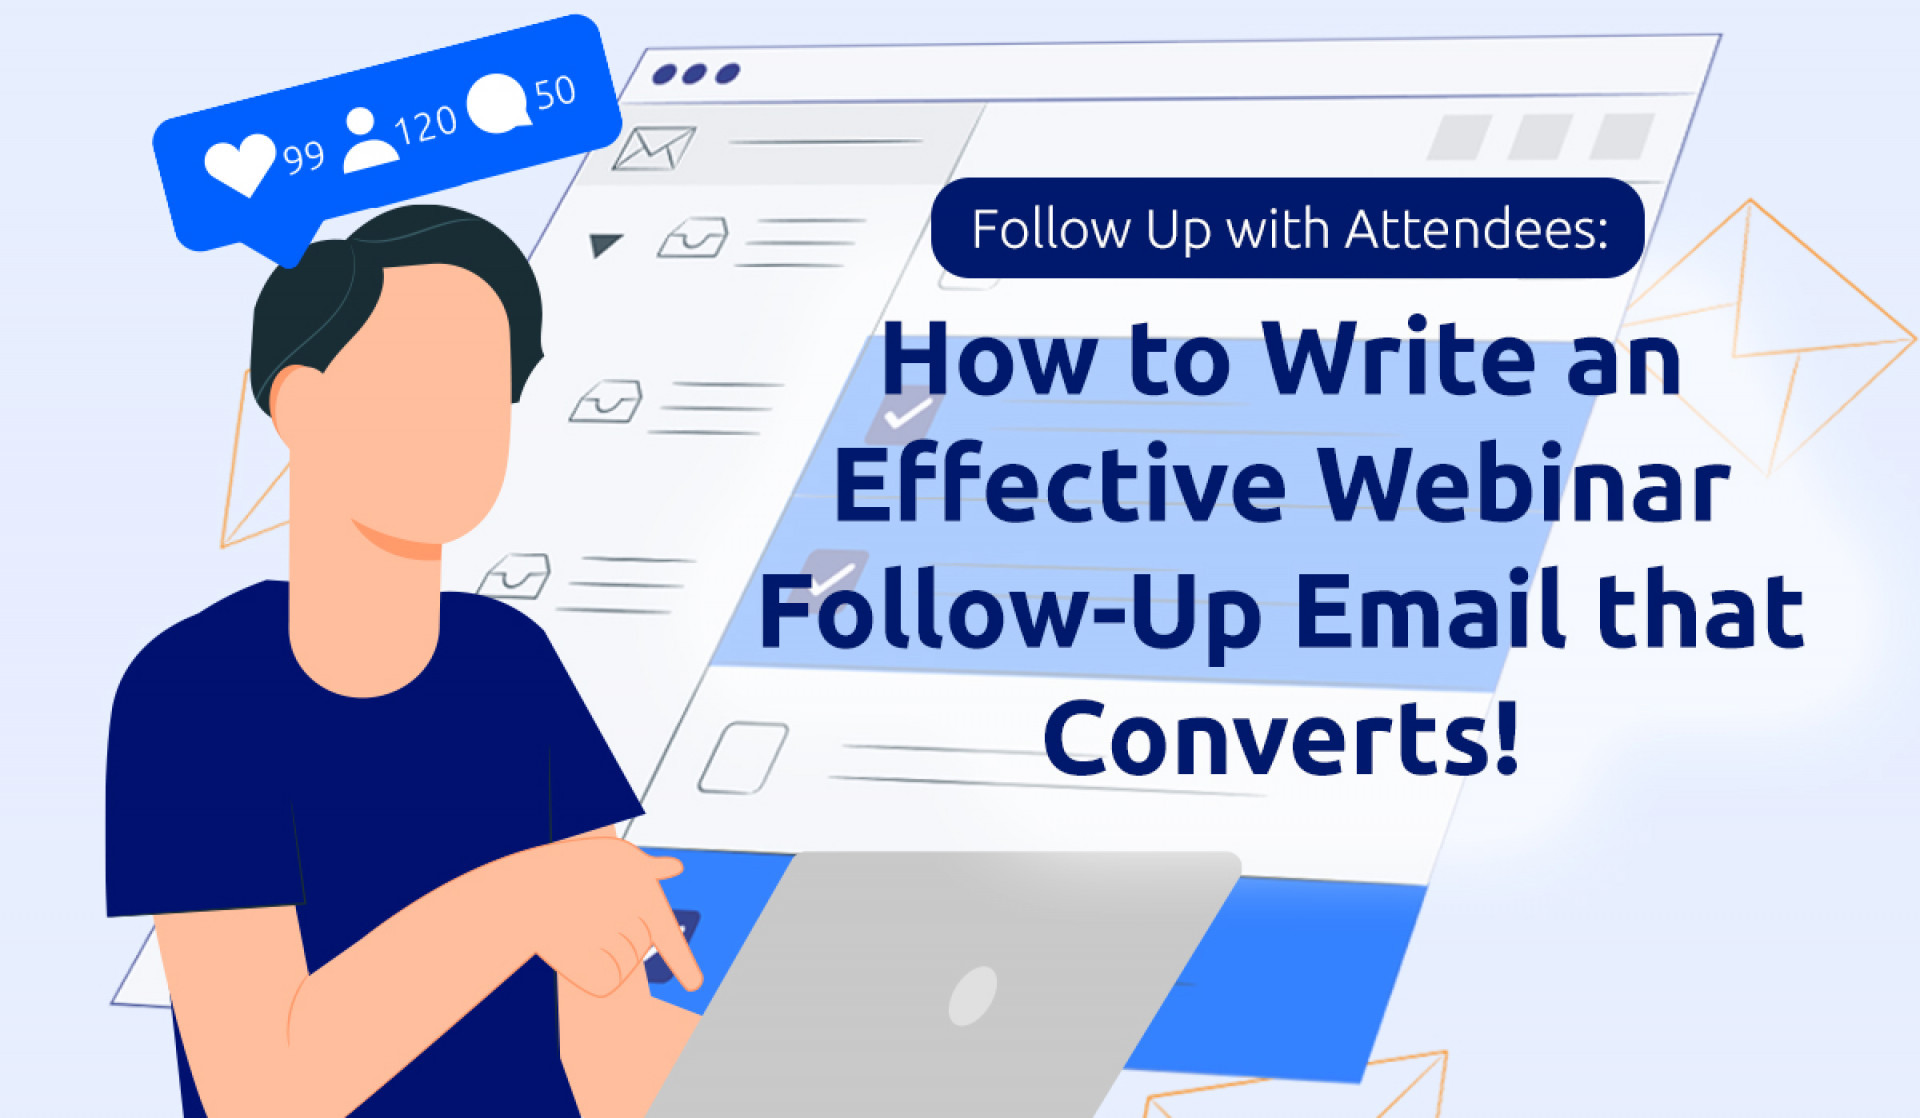 Follow Up with Attendees: How to Write an Effective Webinar Follow-Up Email that Converts